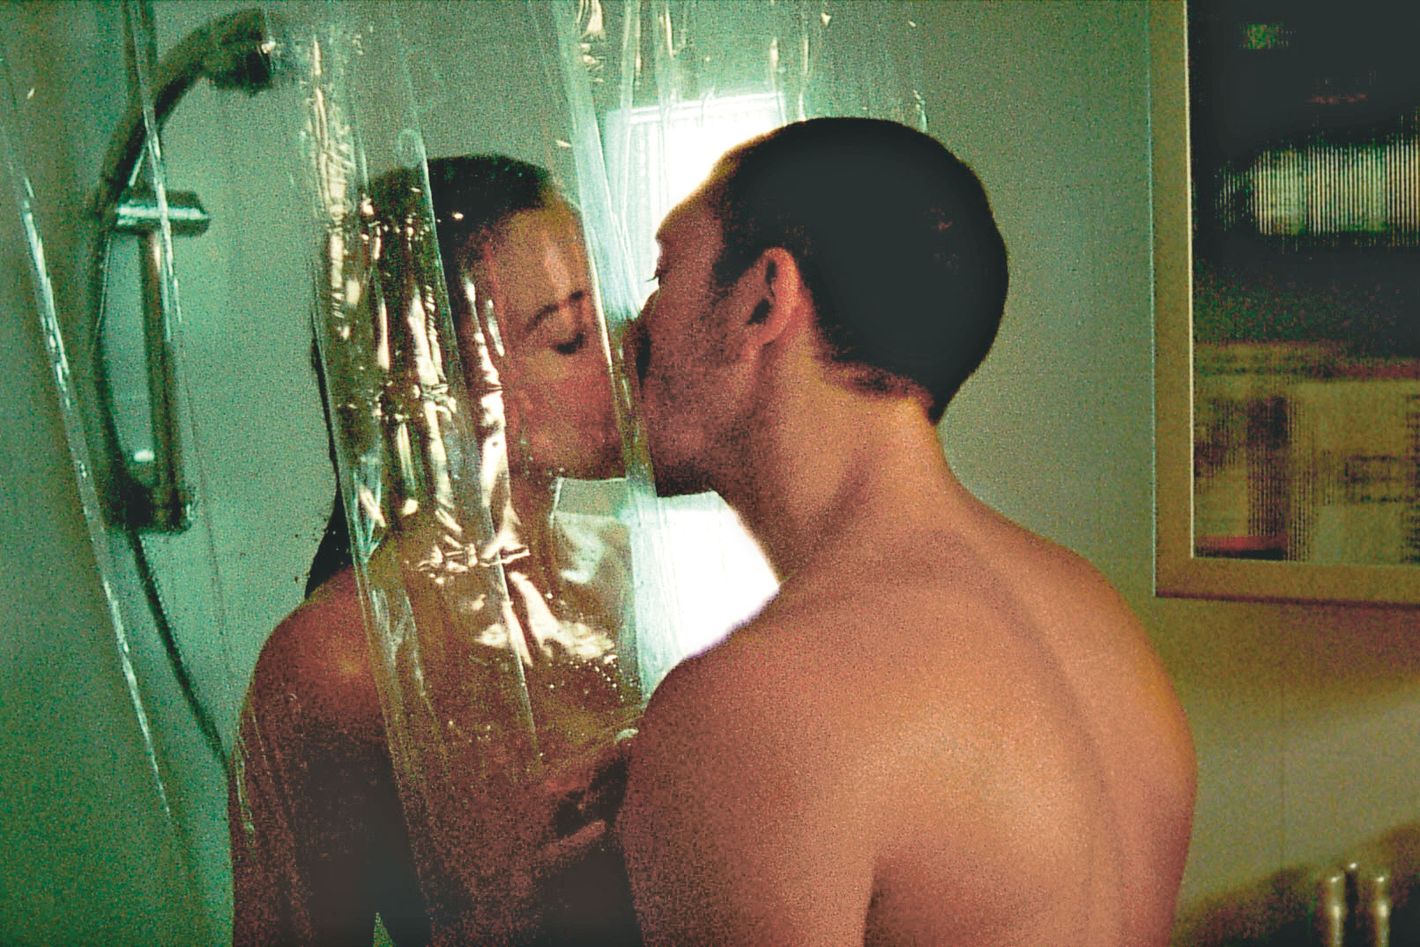 The Beautiful, Dirty Vision of Gaspar image